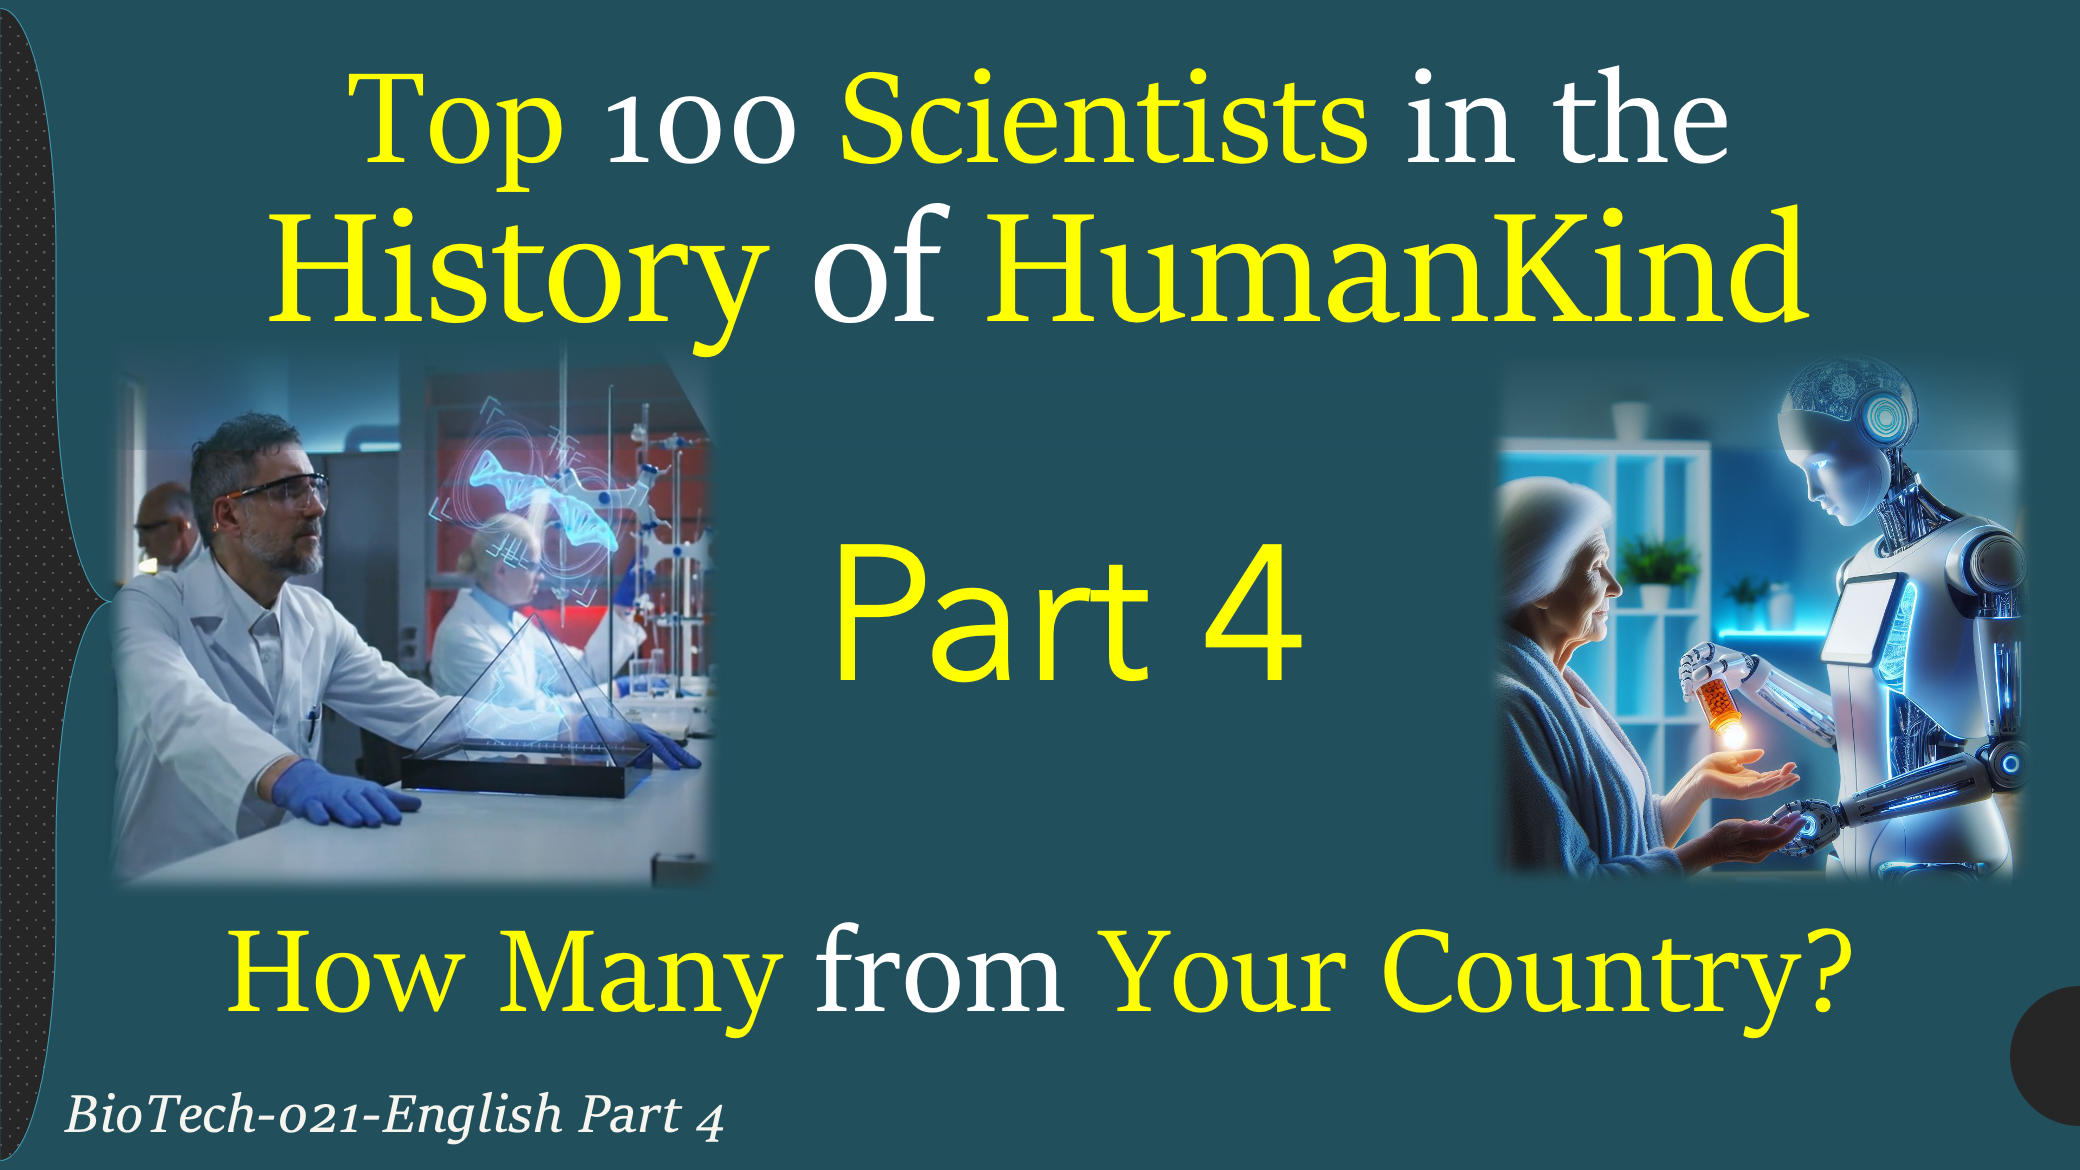 Top 100 Scientists in the History of Humankind (Part 4)